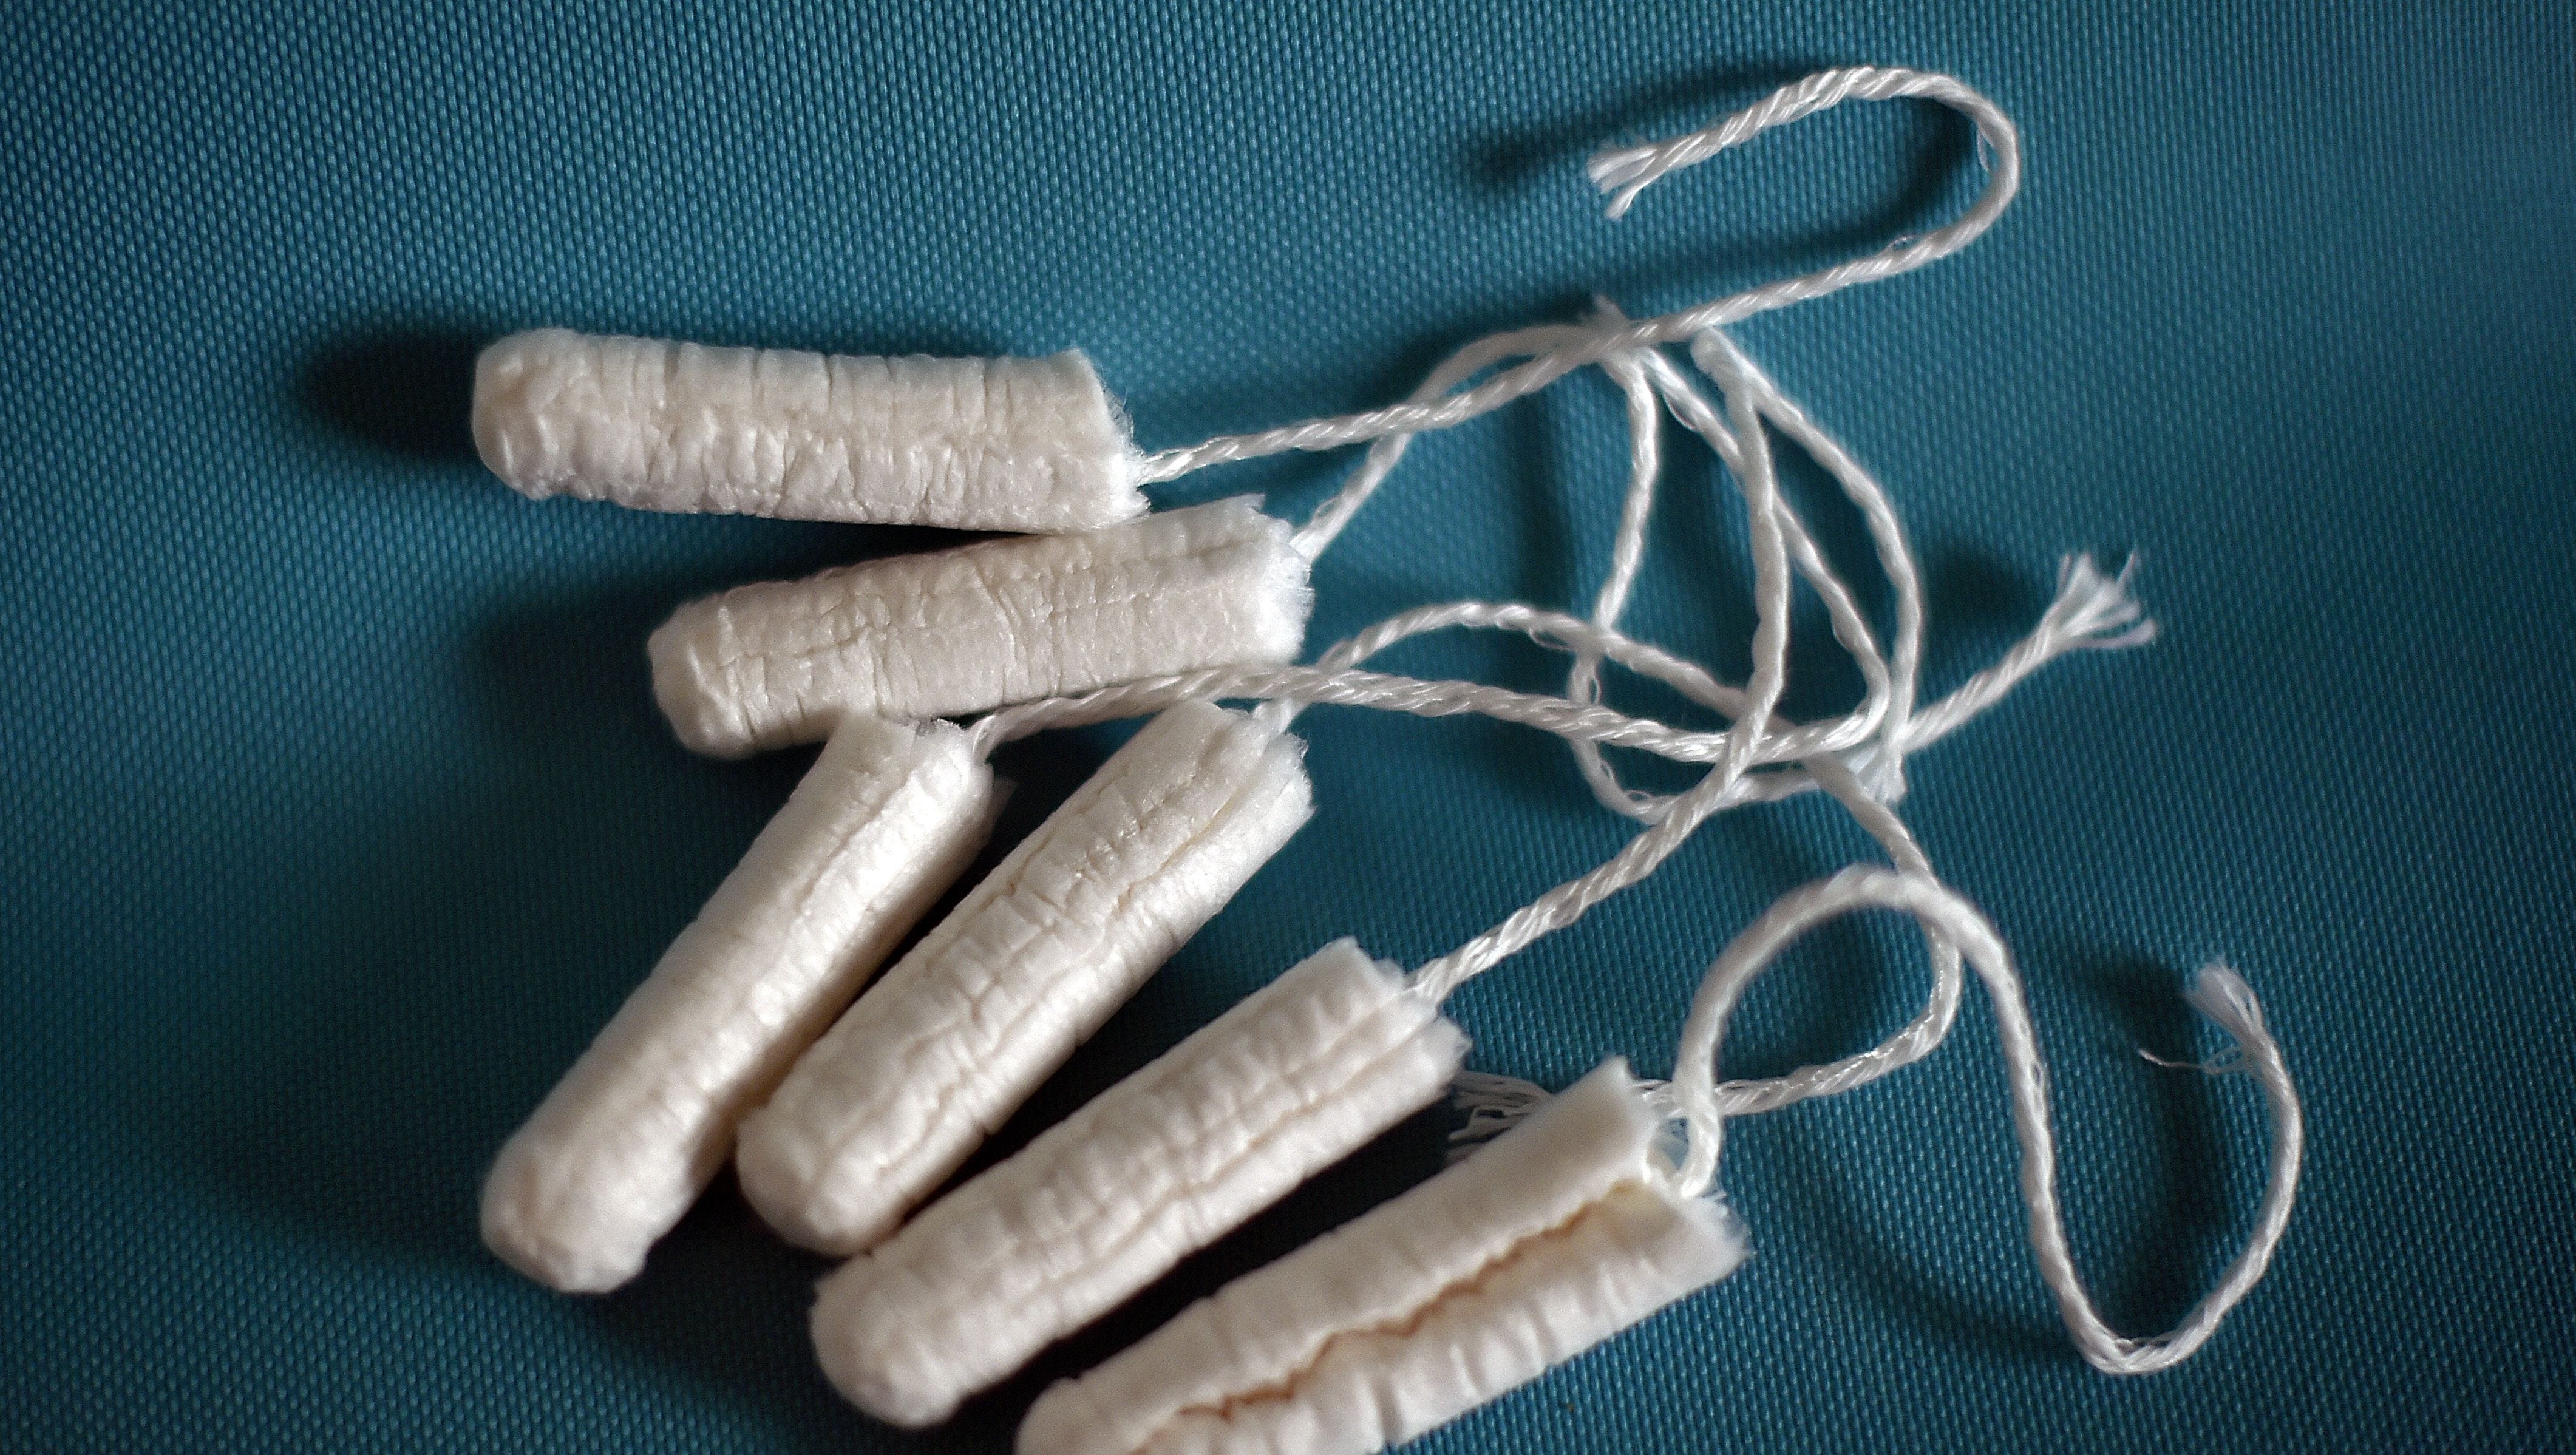 Toxic shock syndrome, infections: What if I leave tampon in for too long?